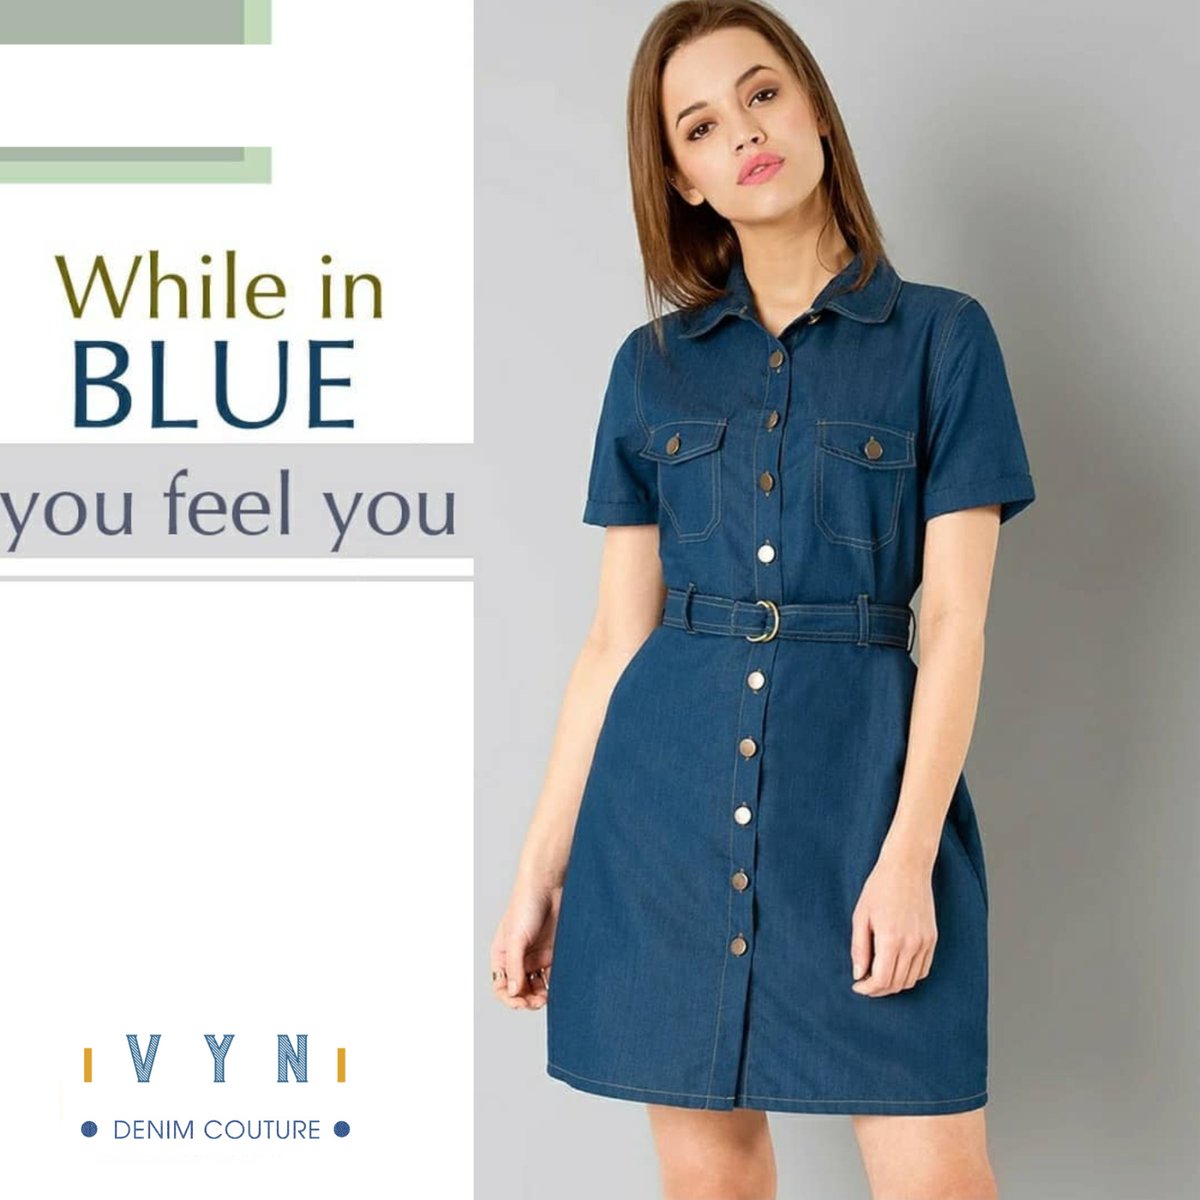 Use things, not people. Love people, not things. But if you buy our denim, you'll want to love it too!

#VYNClothing #VYN #VYNFashion #beyou #feelyou #instaclothing #clothing #instafashion #fashion #lifeisfashion #bluelove #dresswithus #dress #mini #girl #girlclothing #likedress